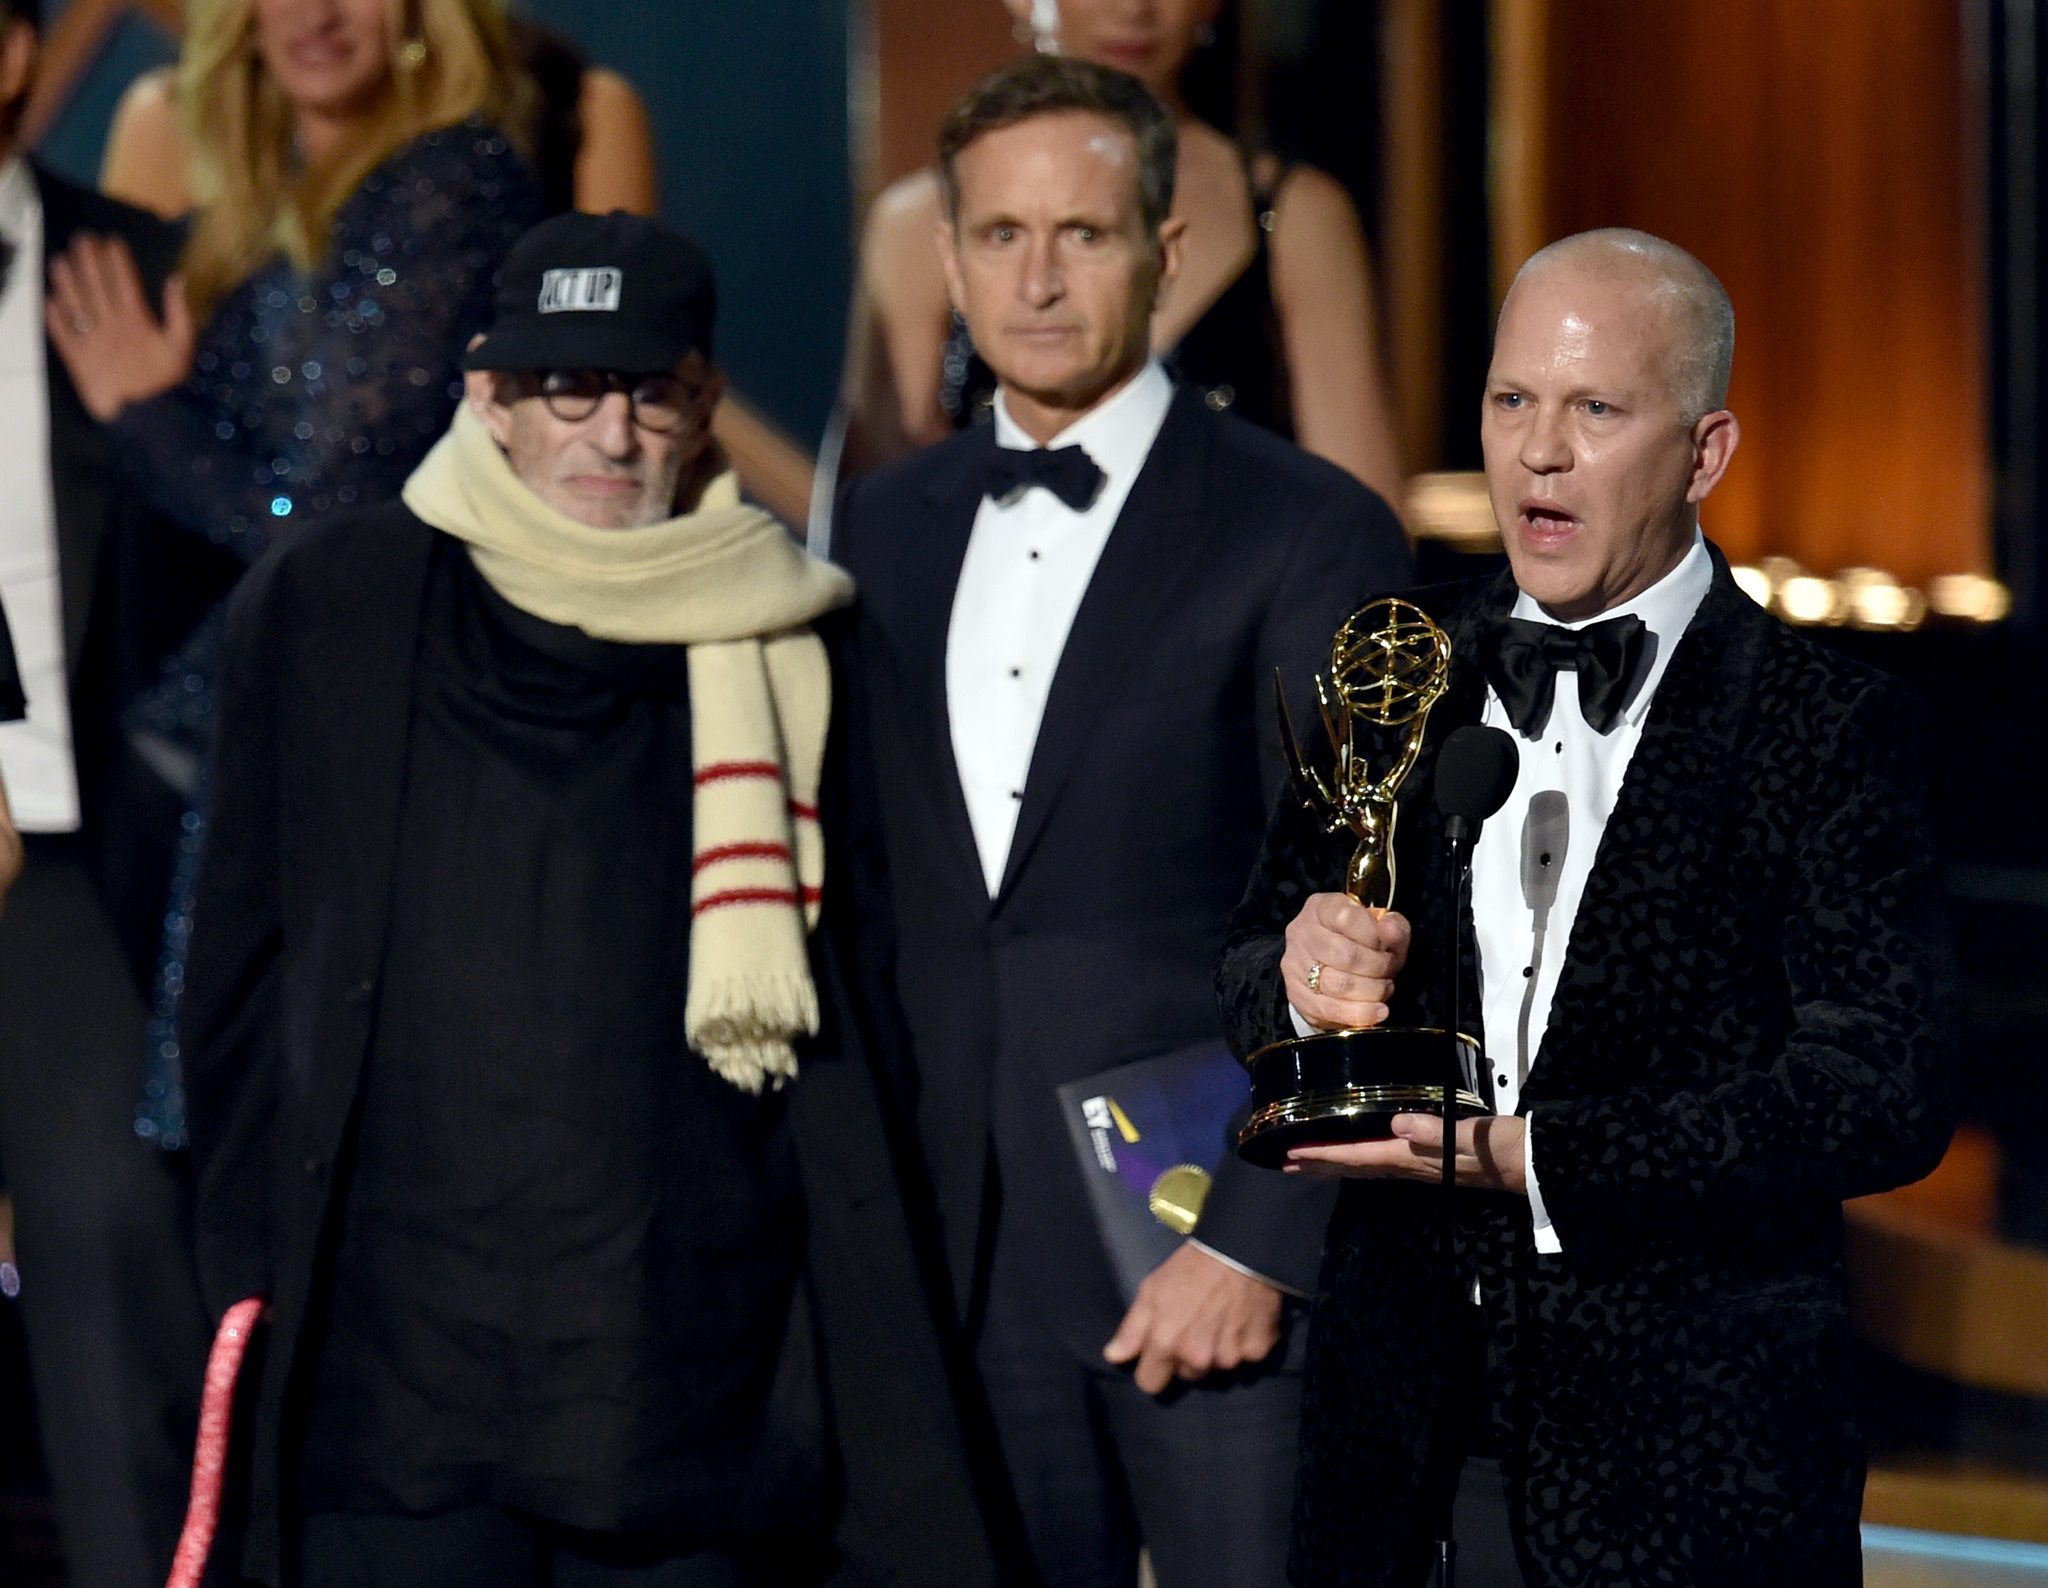 Larry Kramer and Ryan Murphy at event of The 66th Primetime Emmy Awards (2014)